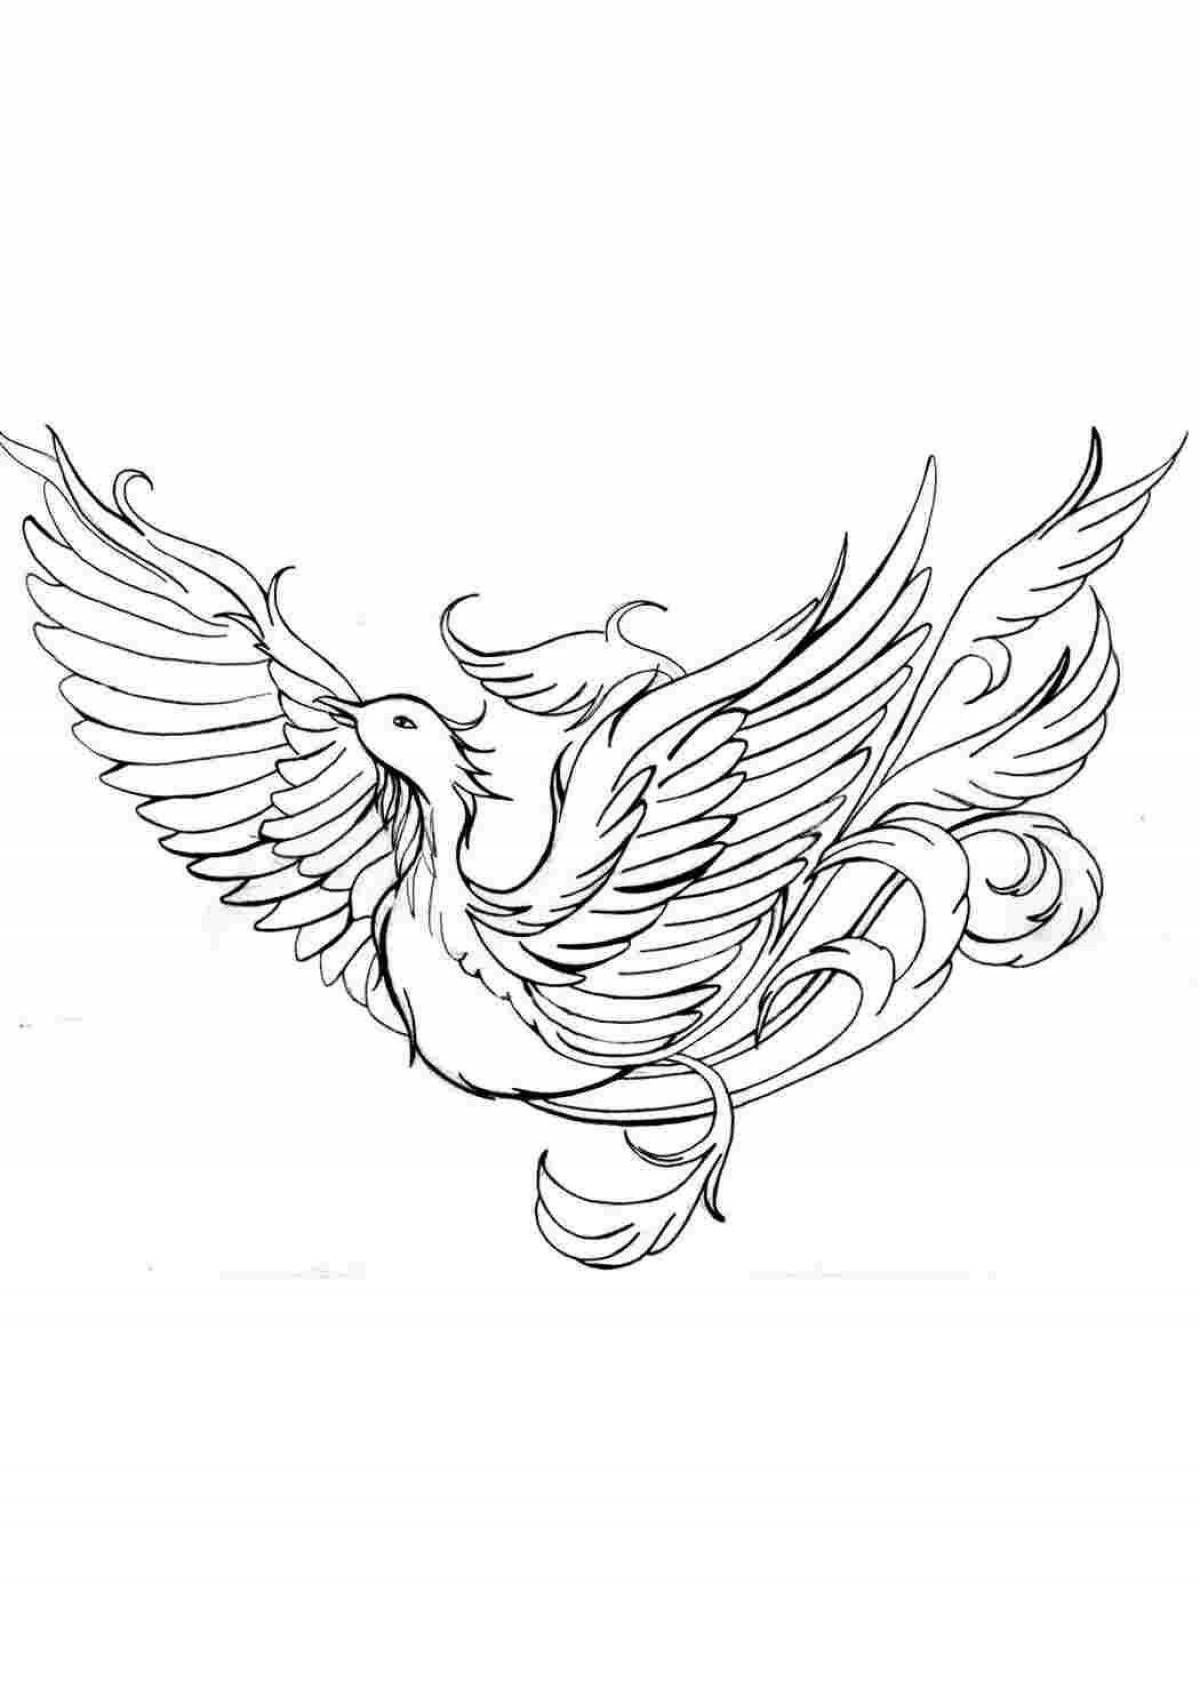 Great firebird coloring book for 5-6 year olds